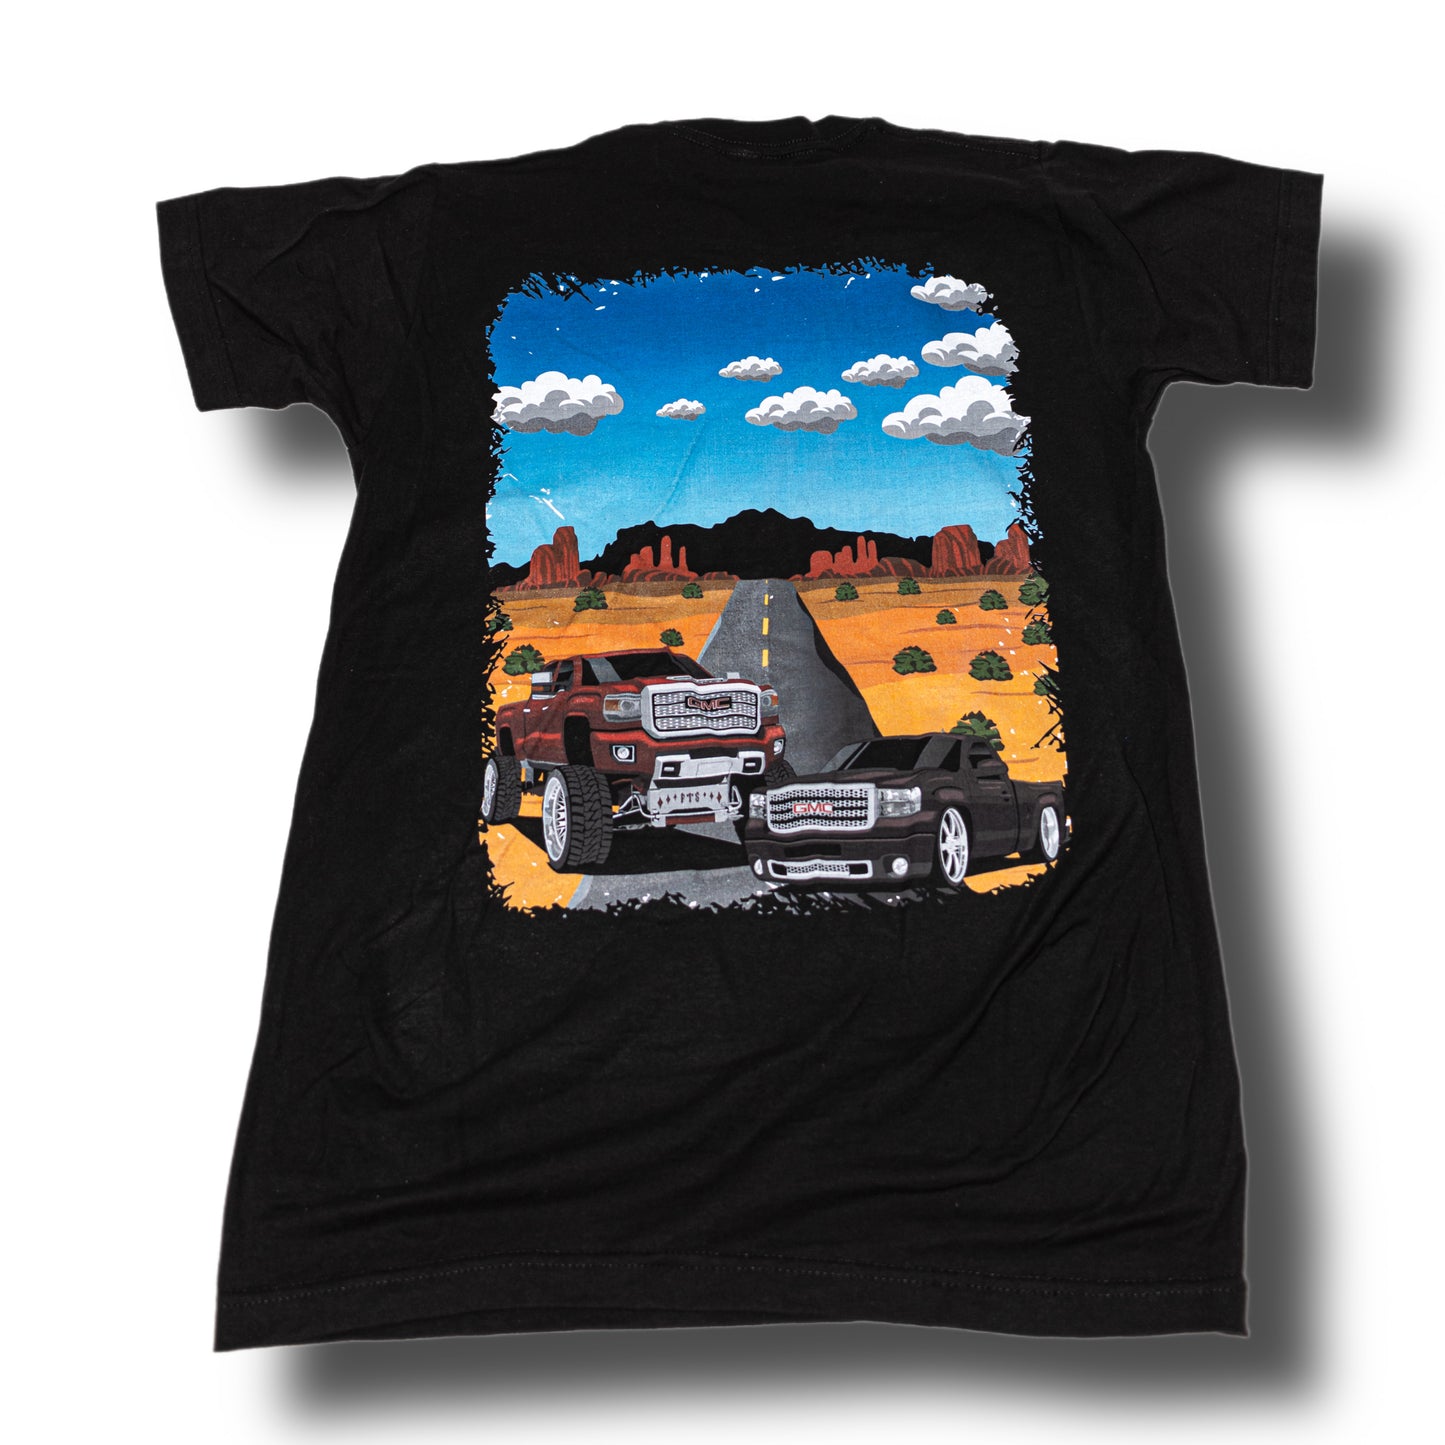 (Lifted and Lowered Sierras) t-shirt